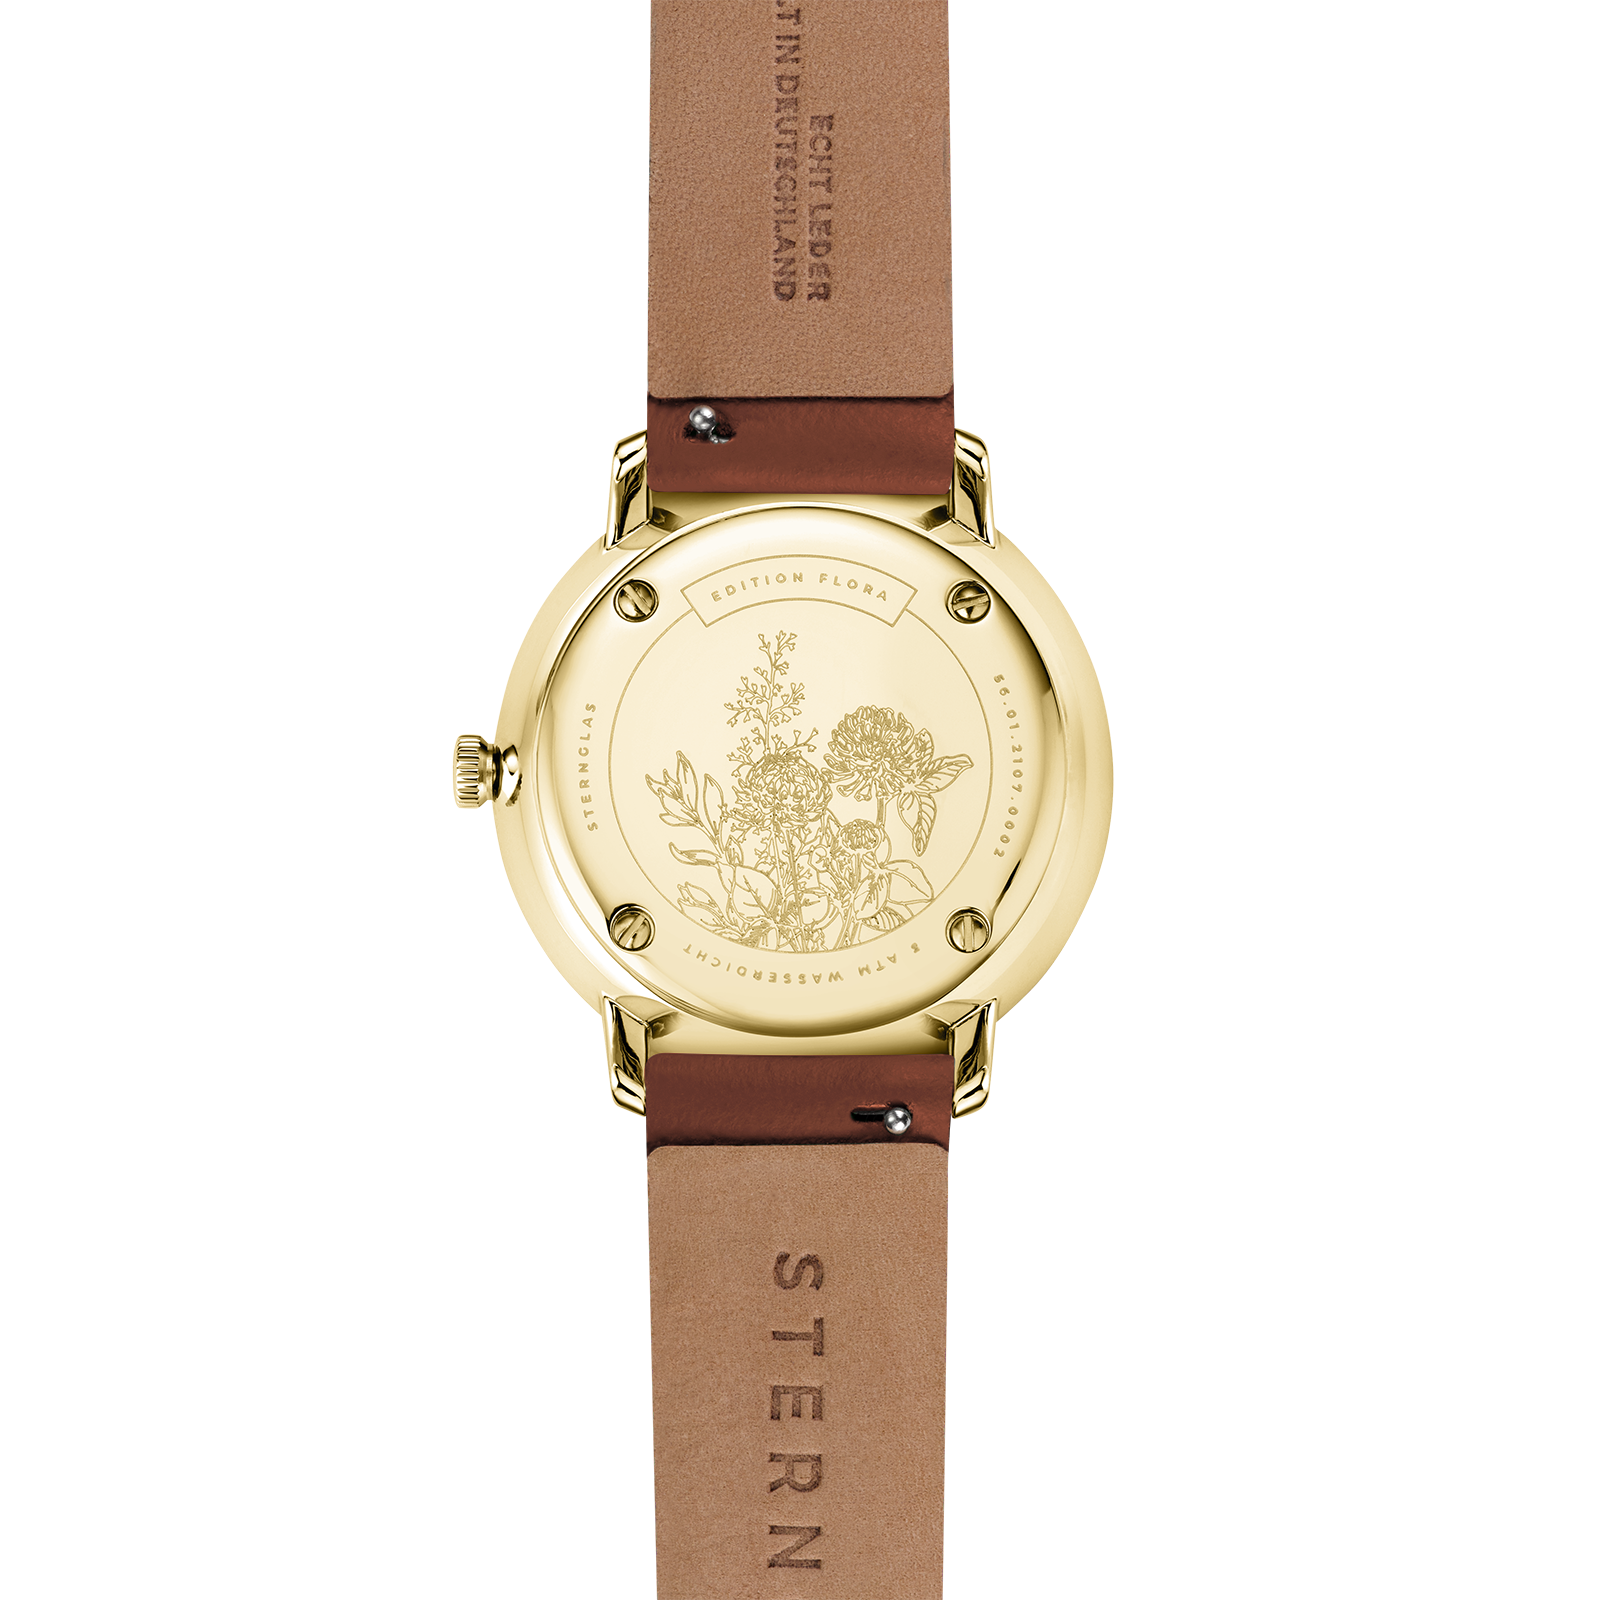 Sternglas Naos Edition XS - Edition Flora